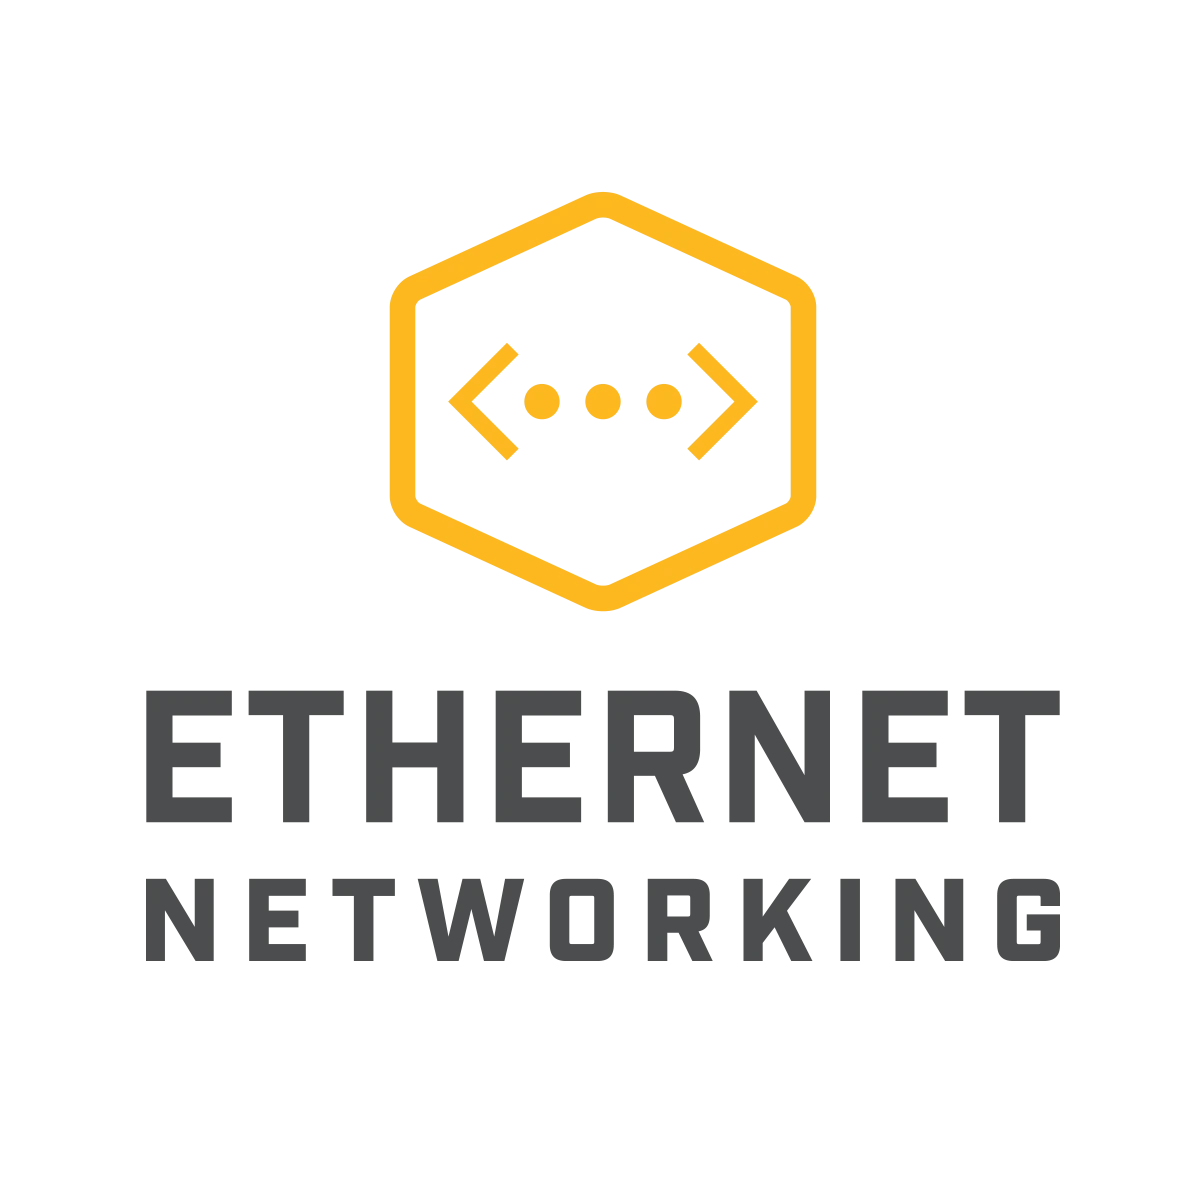 Ethernet Networking